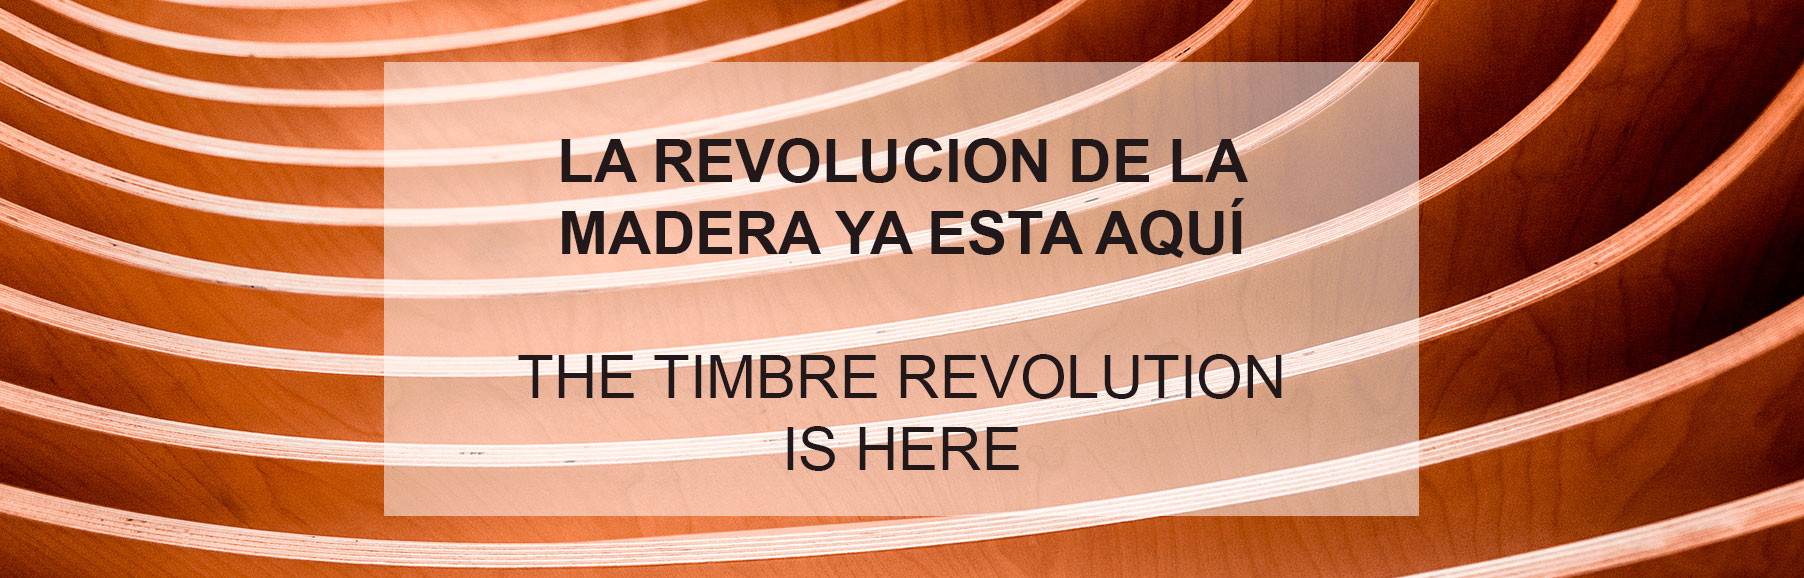 The timber revolution is here